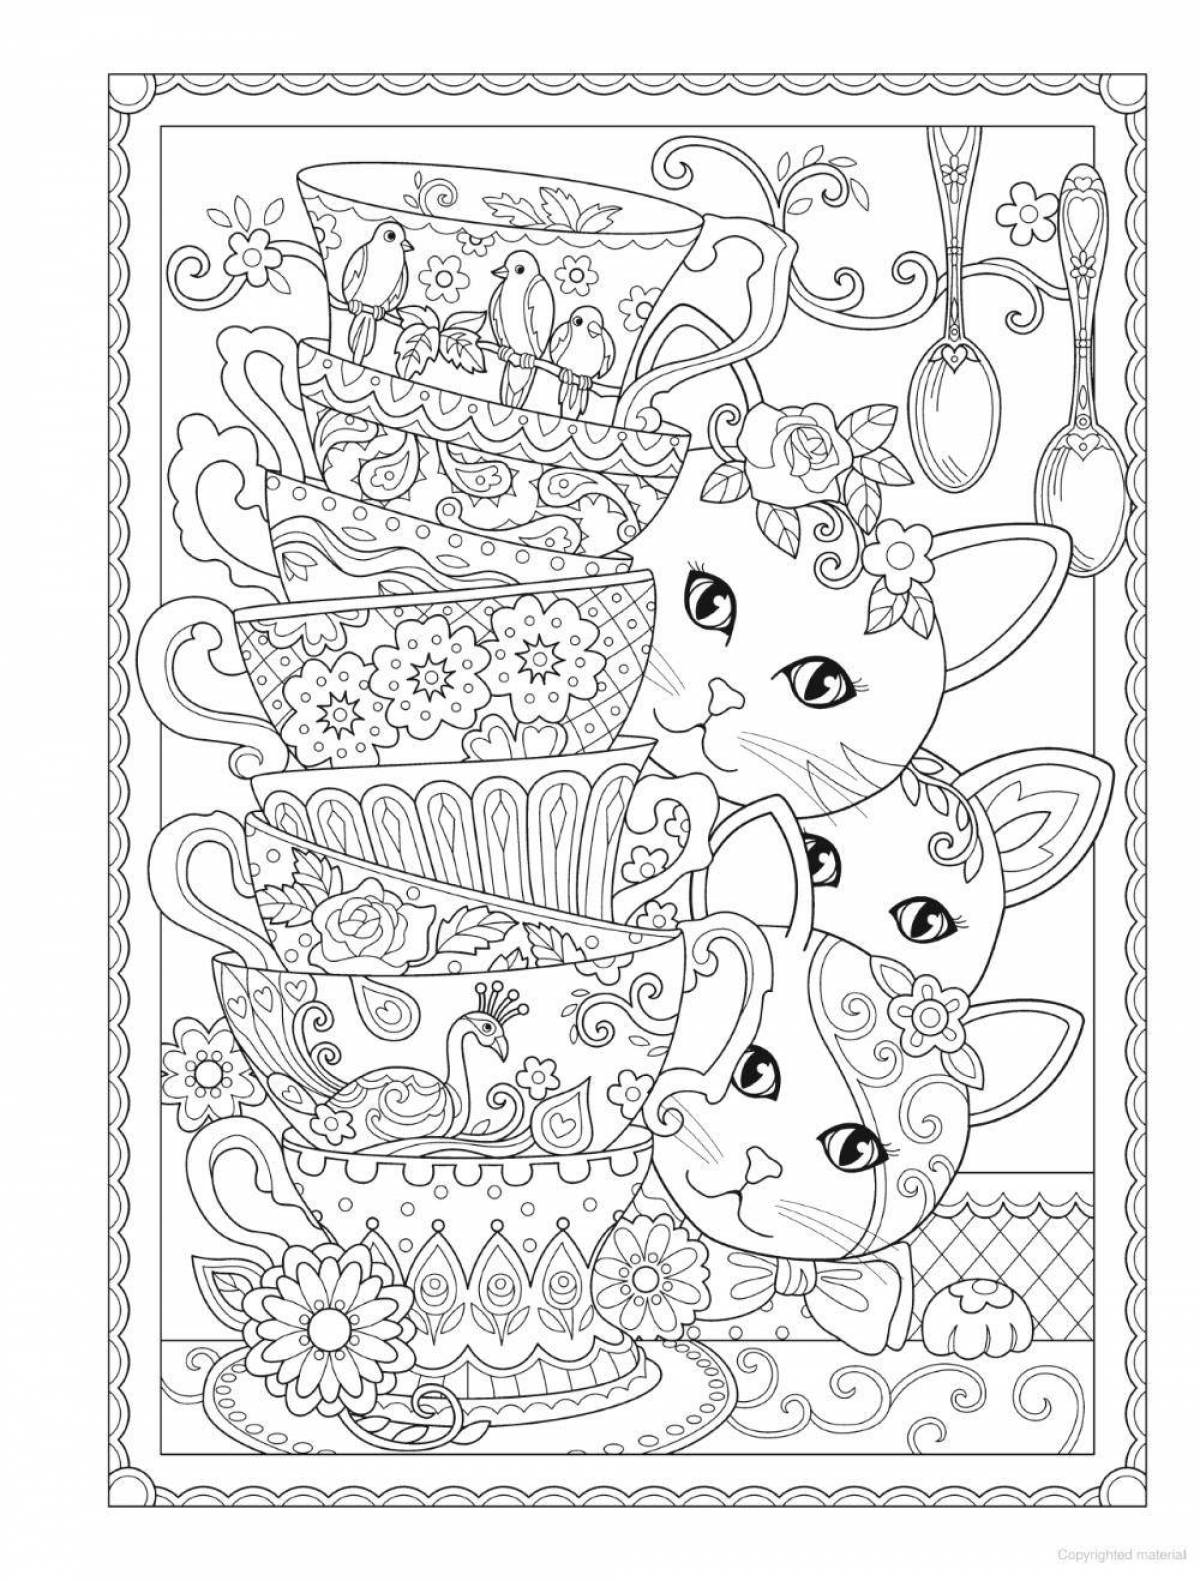 Sparkly cute coloring book